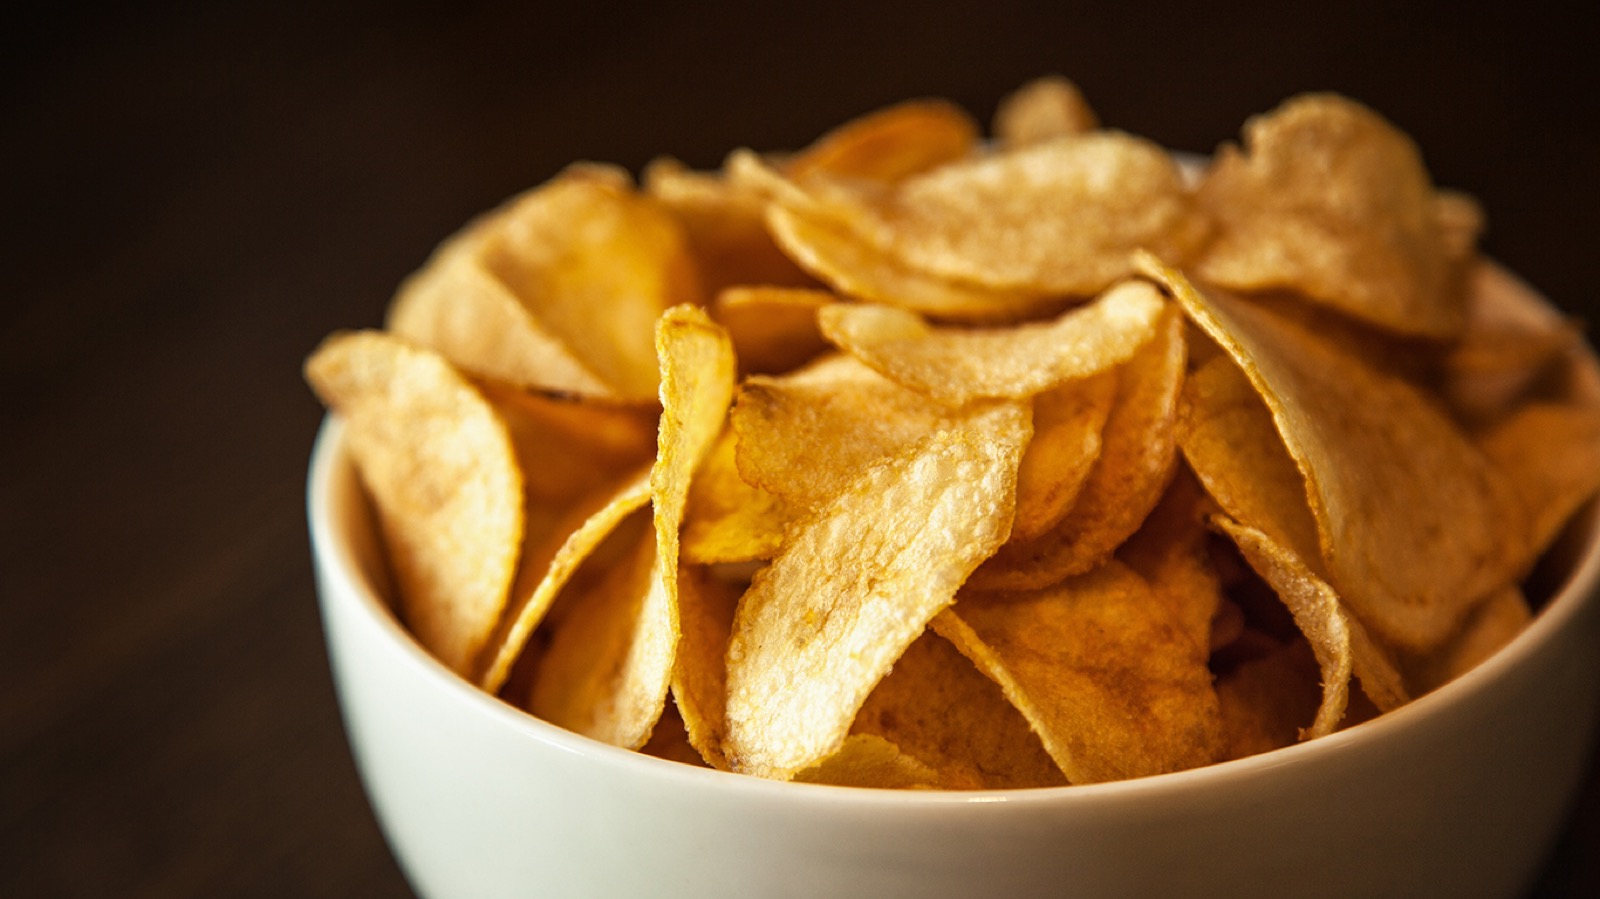 Only the Biggest – And I Mean BIGGEST – English Language Masters Can Pass This Test Crispy potato chips in white bowl